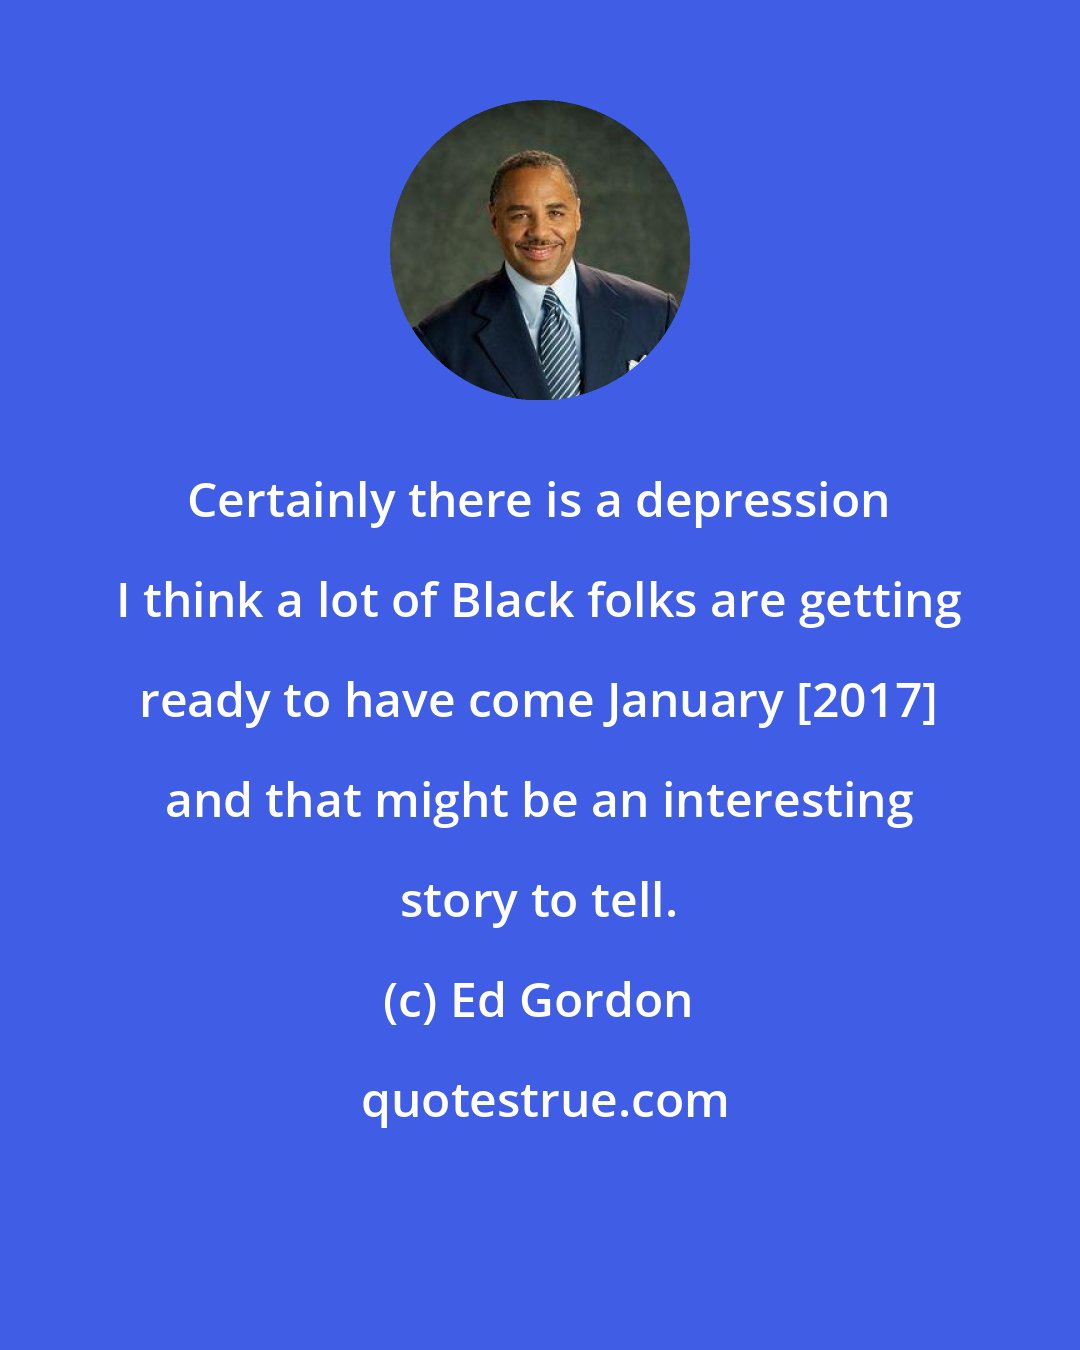 Ed Gordon: Certainly there is a depression I think a lot of Black folks are getting ready to have come January [2017] and that might be an interesting story to tell.